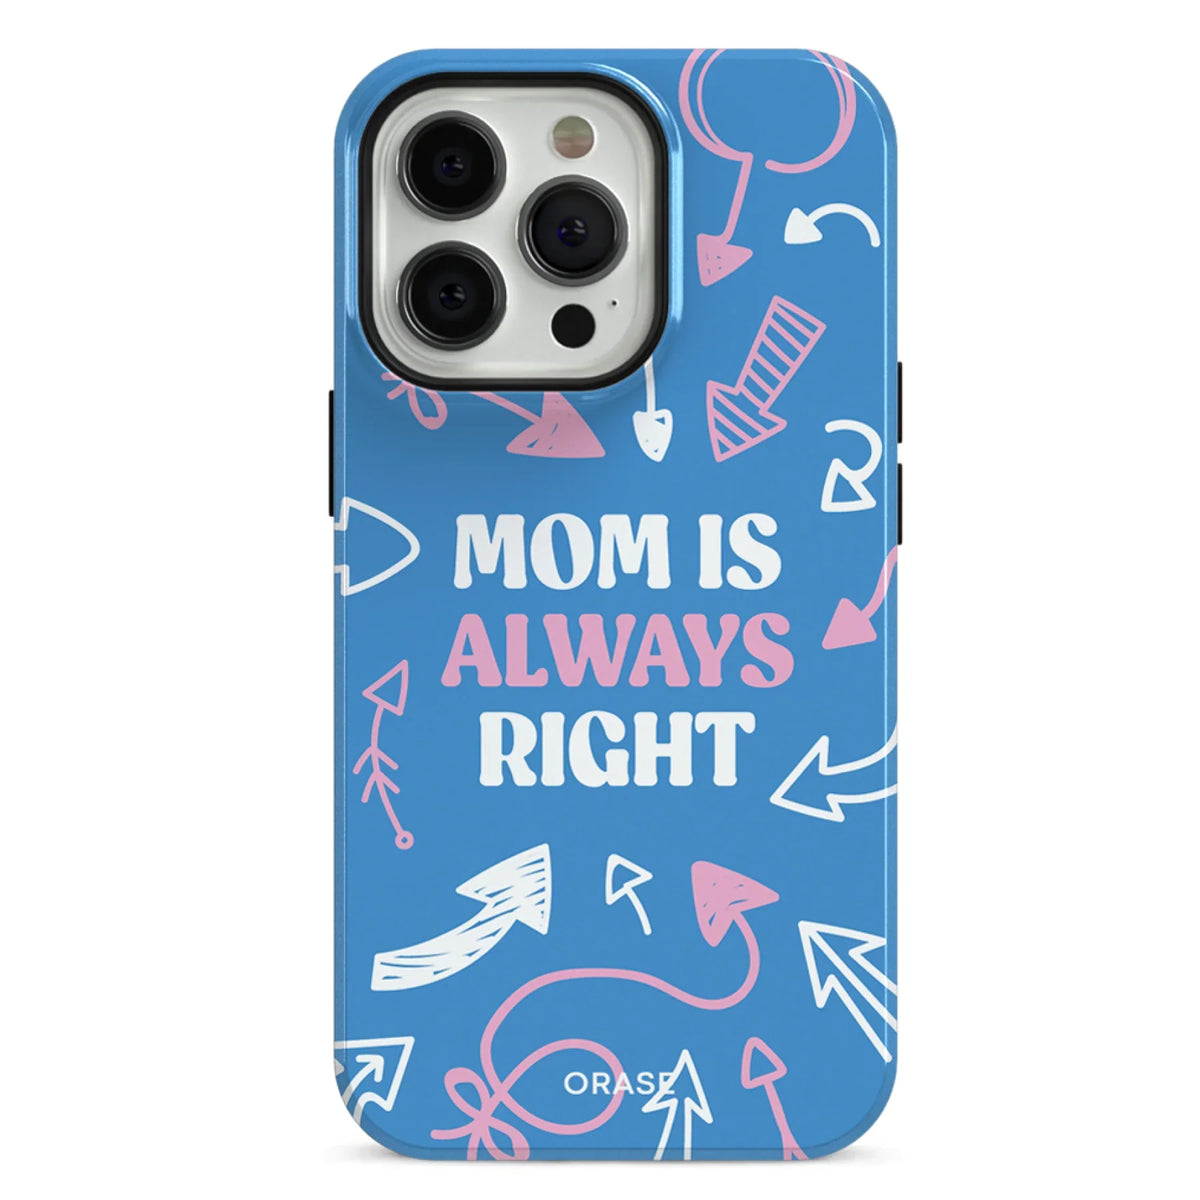 Mom Is Always Right iPhone Case - iPhone 13 Pro